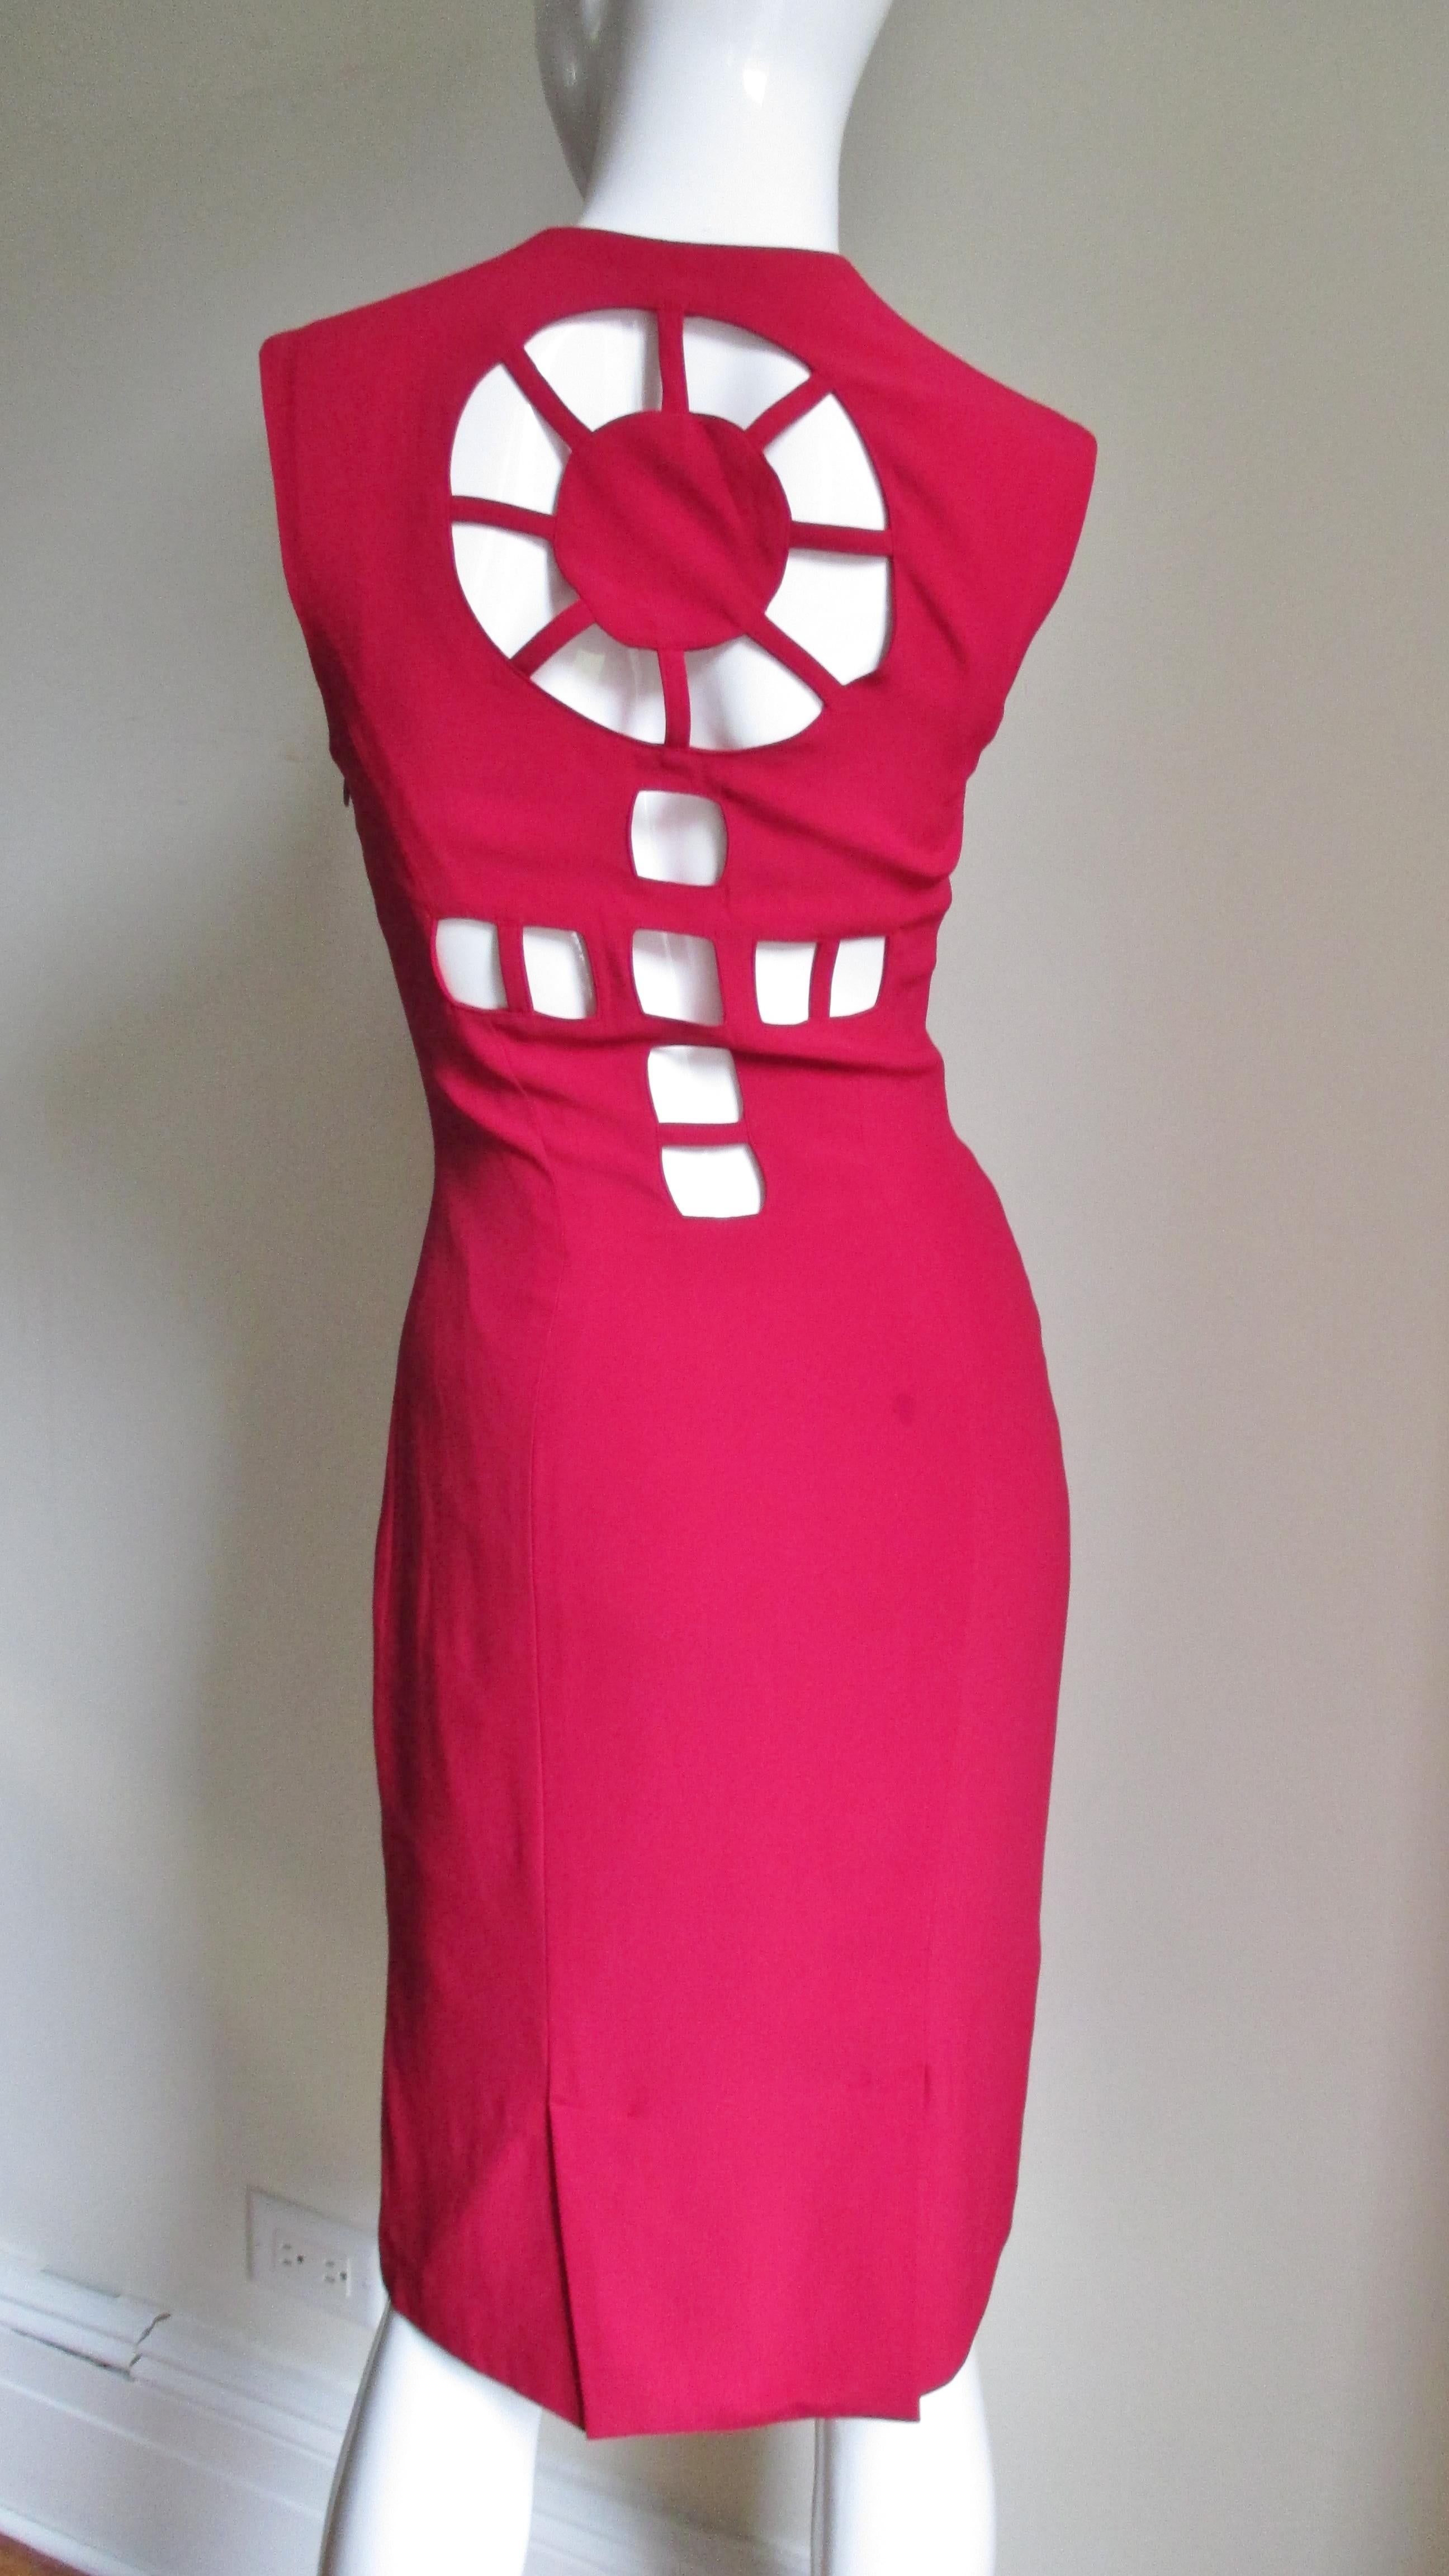 A gorgeous dress red from Sophie Sitbon   The sleeveless dress is fitted with princess seams and a square neckline.  The back is absolutely amazing with cutouts forming a circle at the upper back and cutouts forming a cross below that.  It is fully